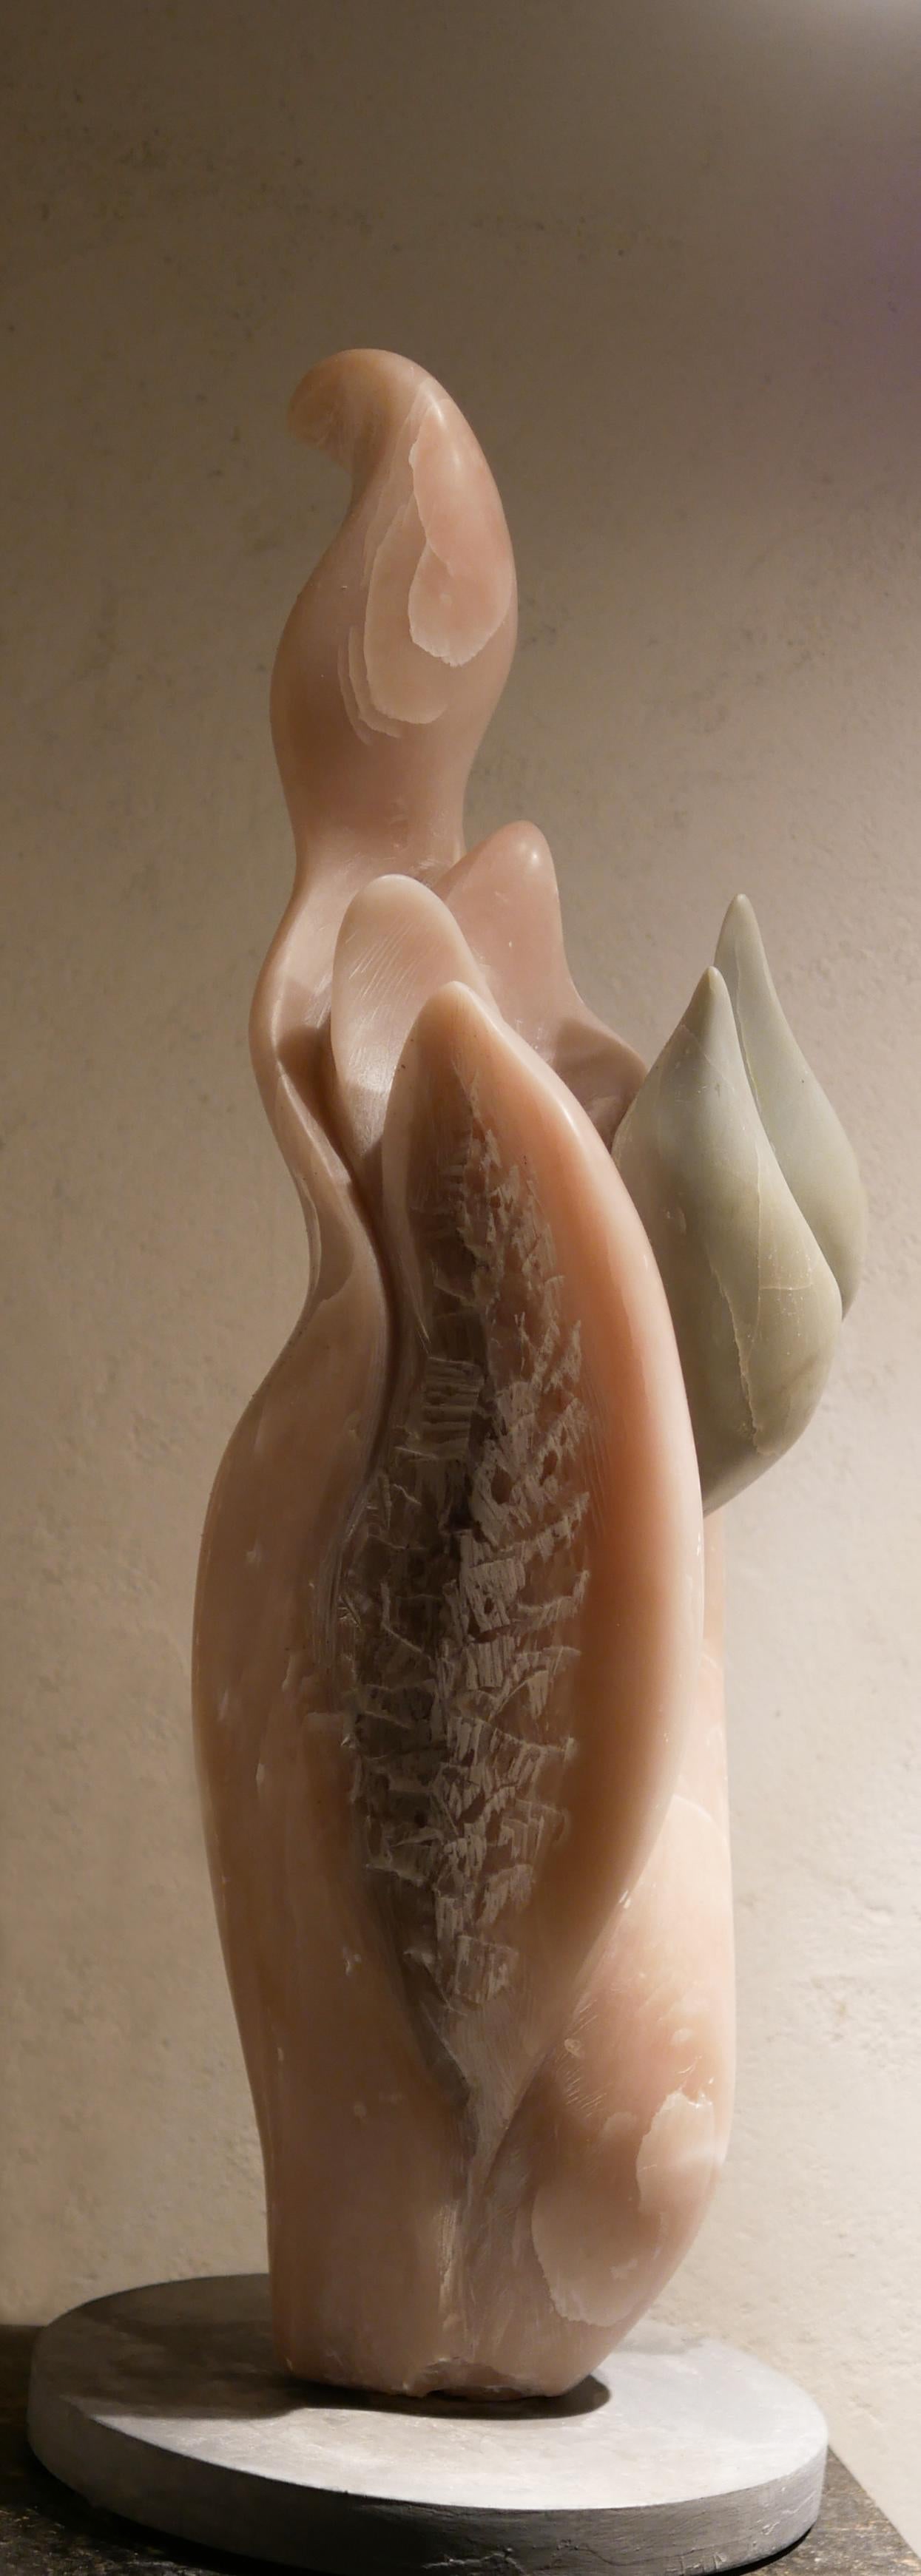 Nicole Durand Abstract Sculpture - 21st Century Contemporary Alabaster Green and Pink Steatite Sculpture 